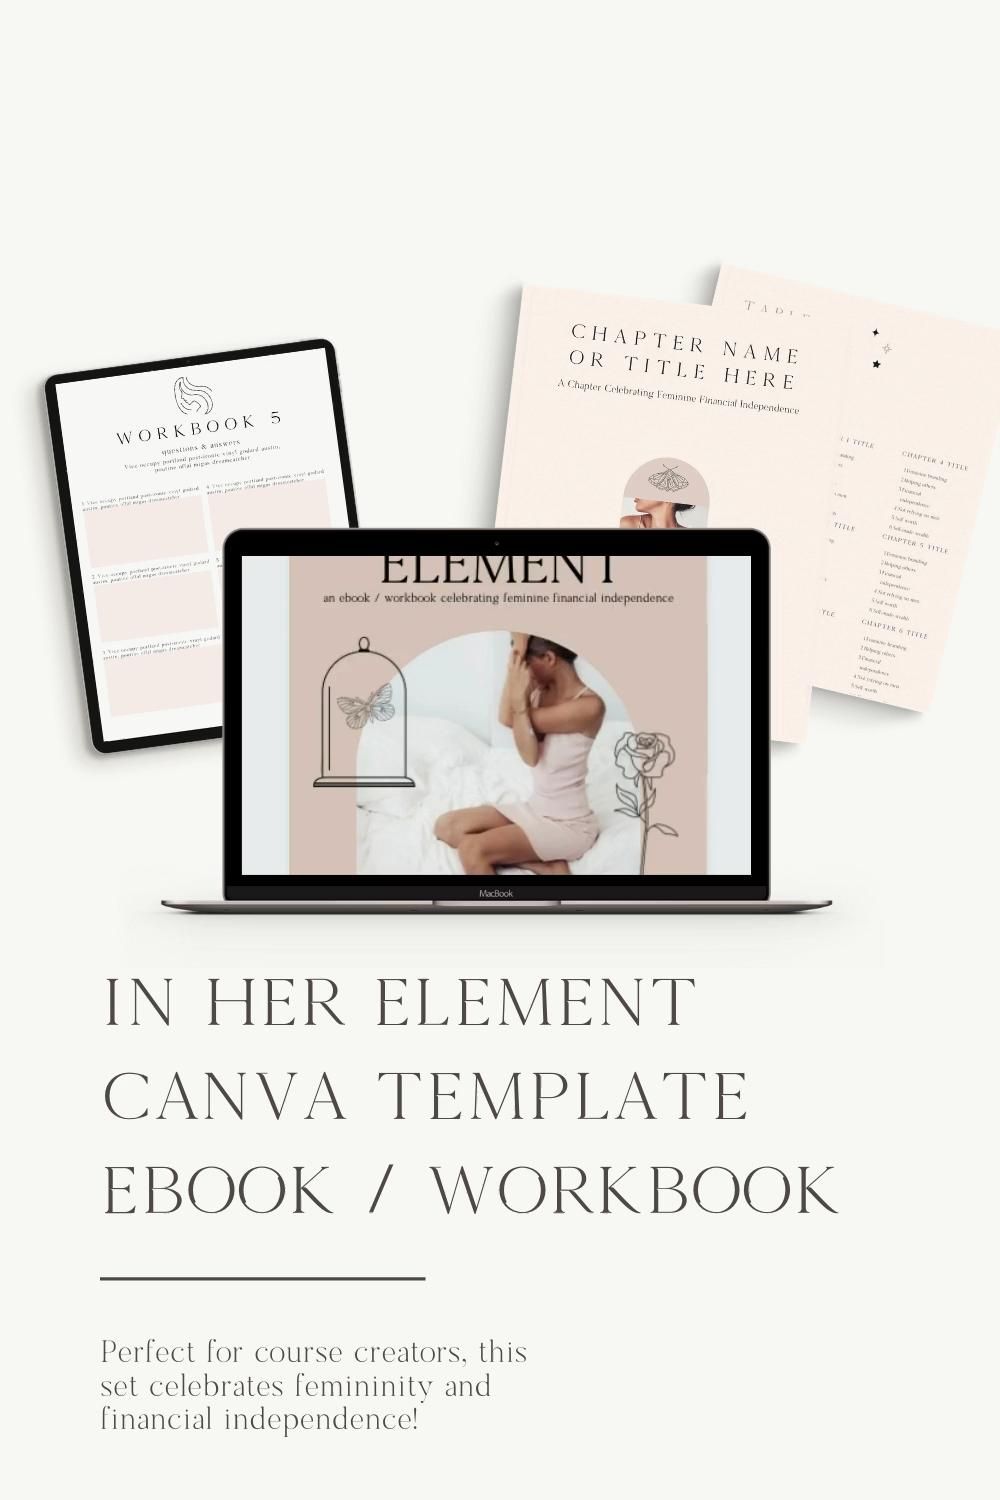 In Her Element Canva Template for Bloggers, Writers, Coaches -   magazine style Guides